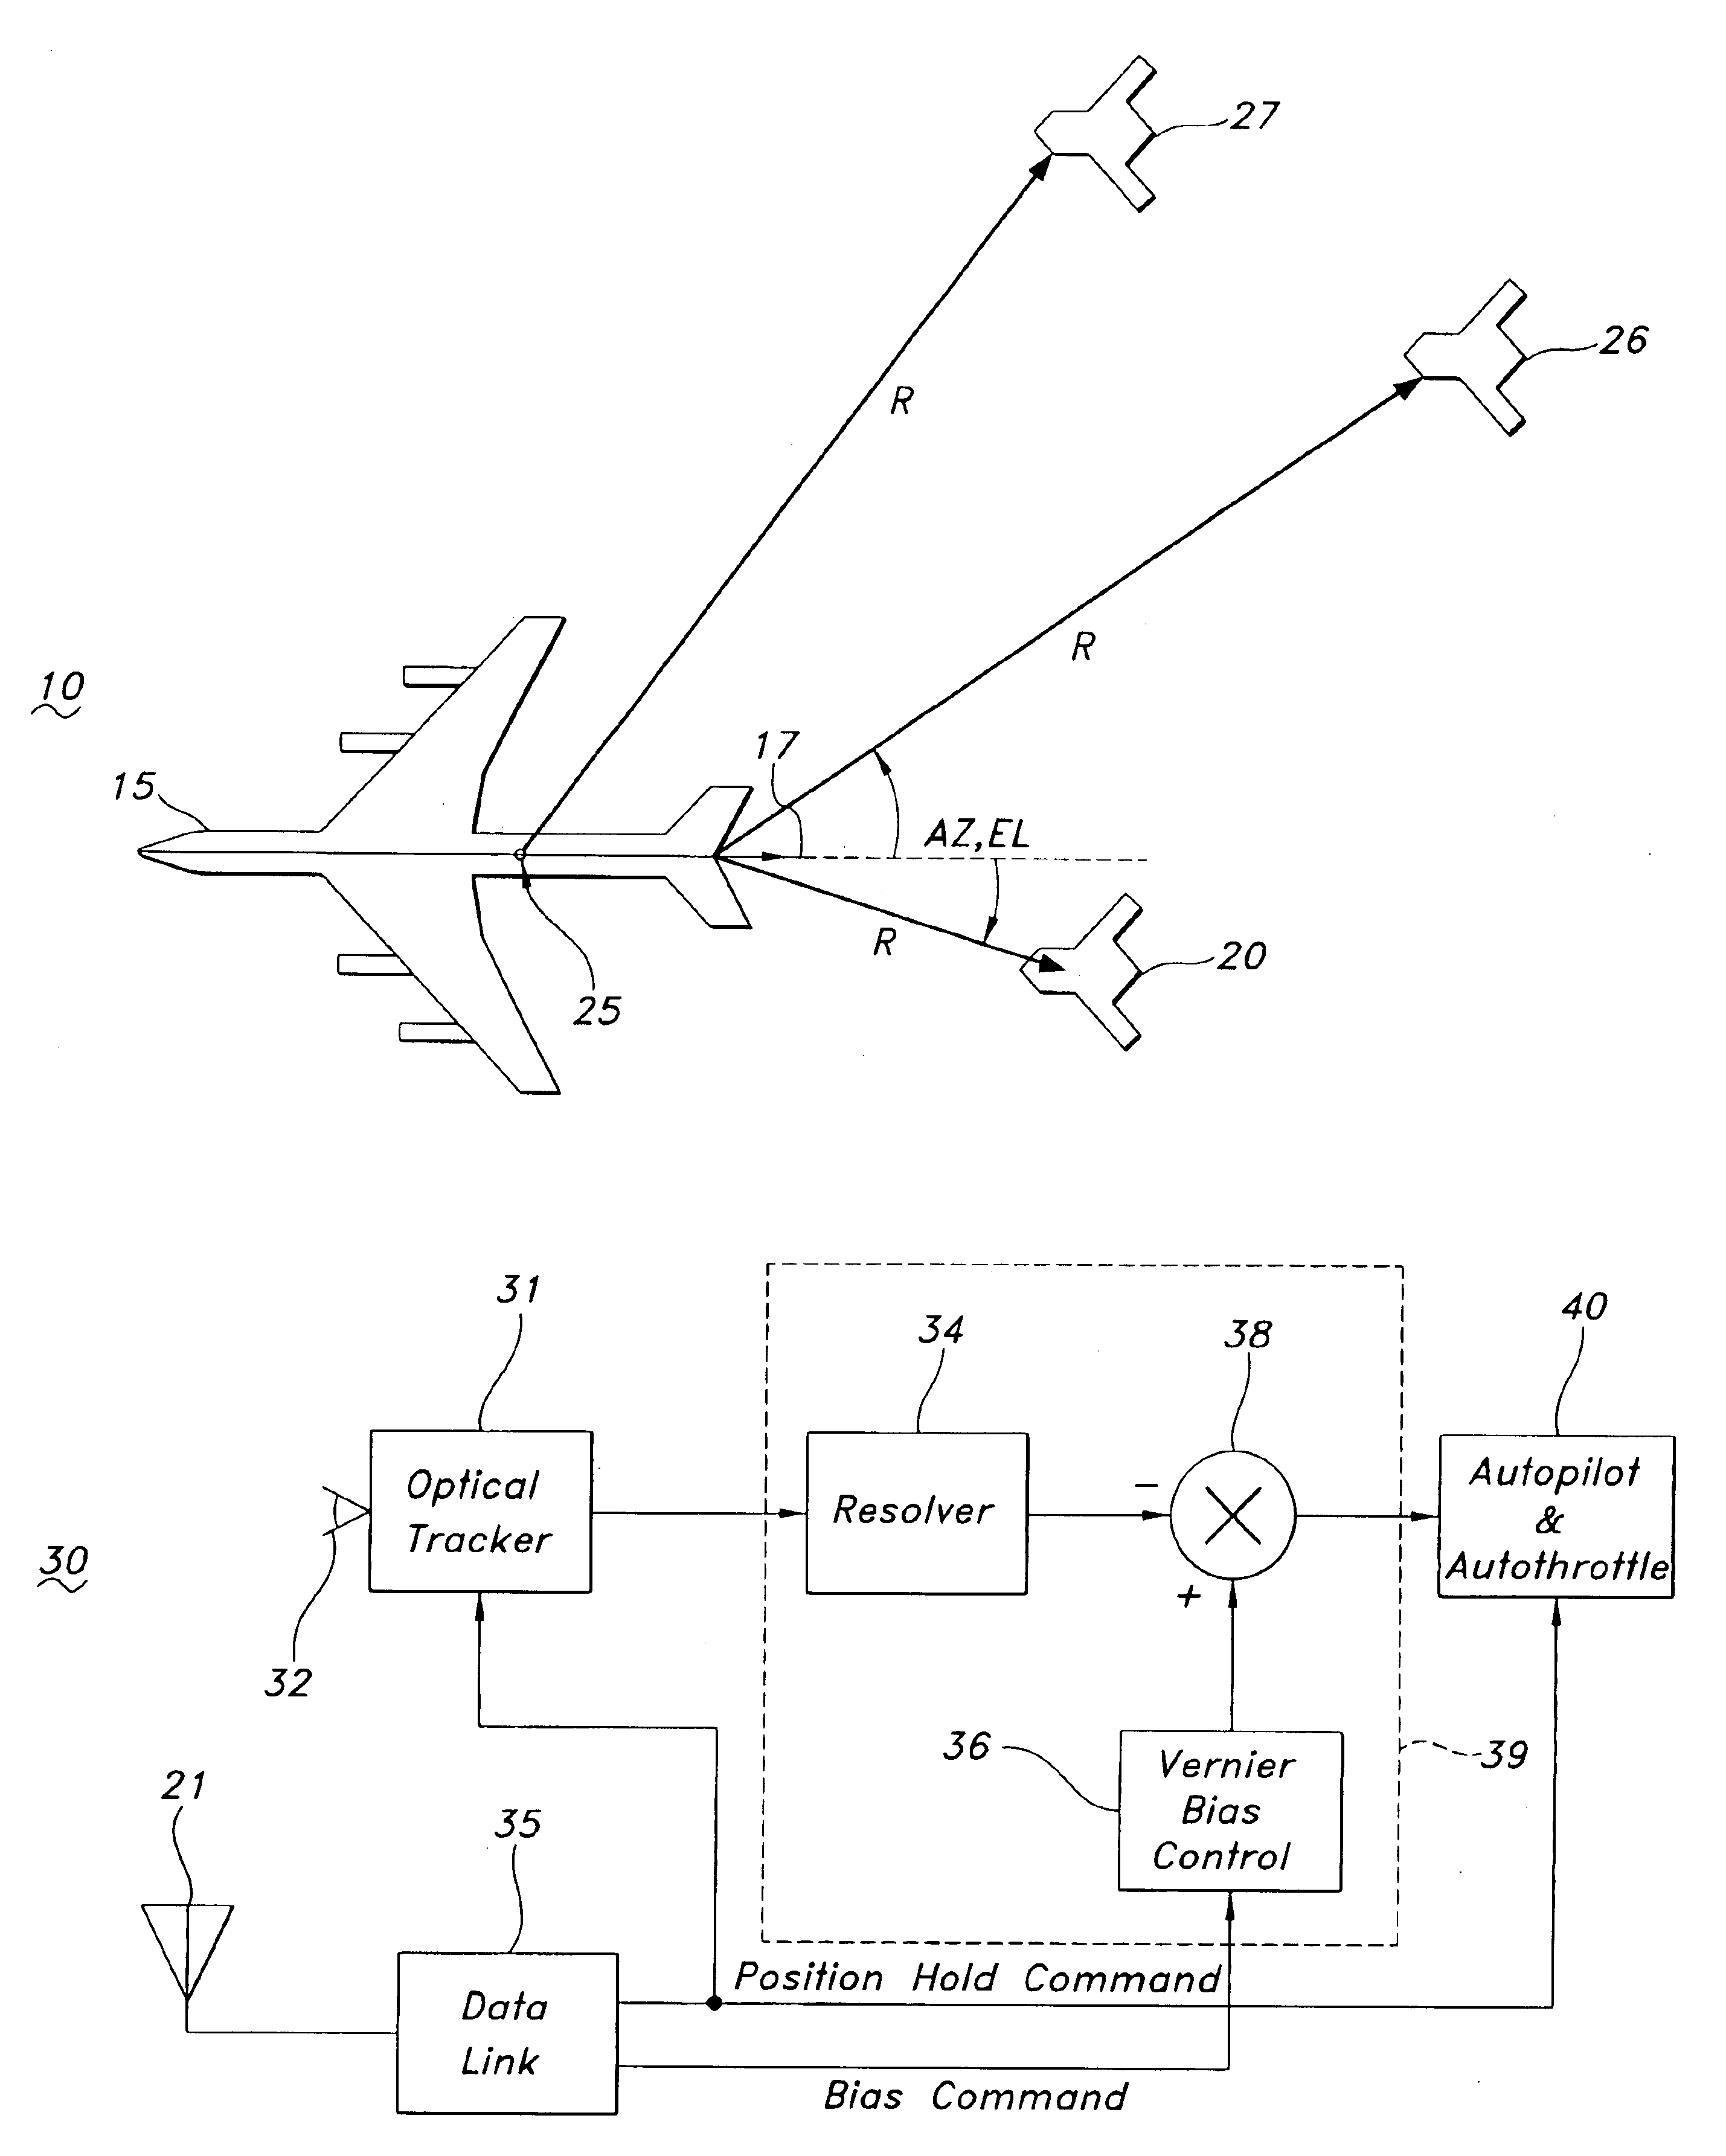 Aircraft formation/refueling guidance system